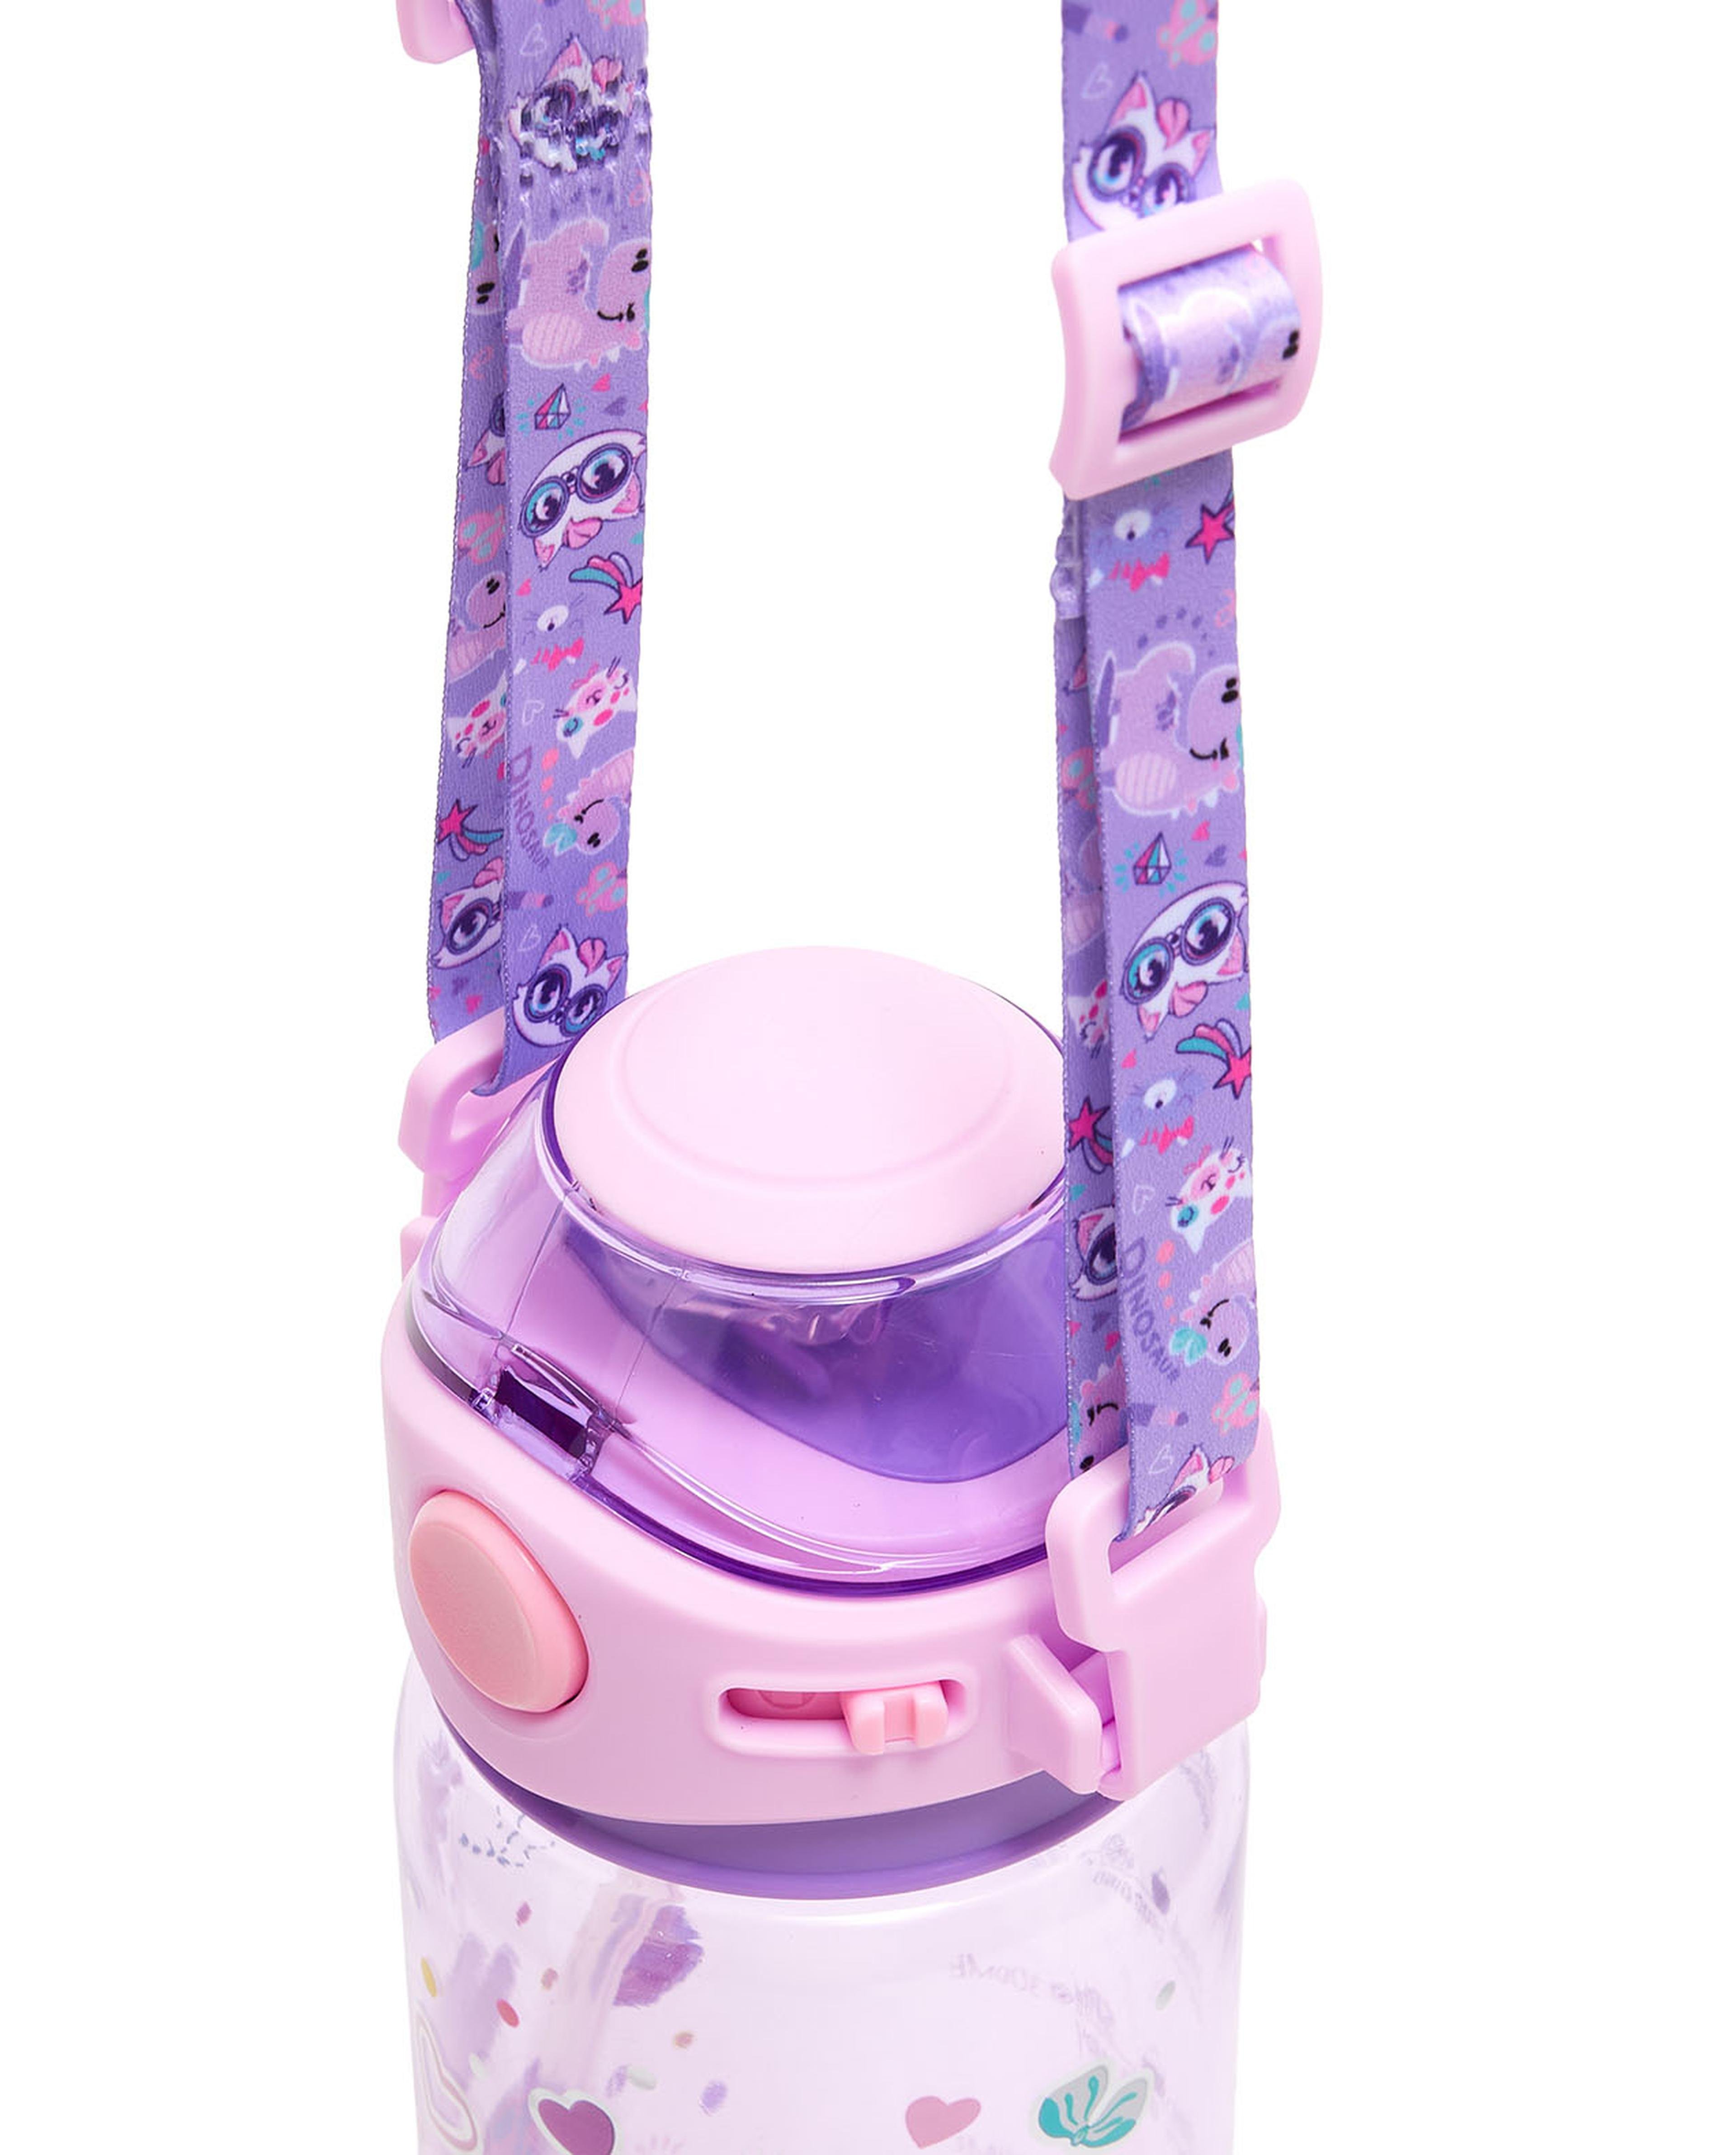 Printed Sipper Water Bottle